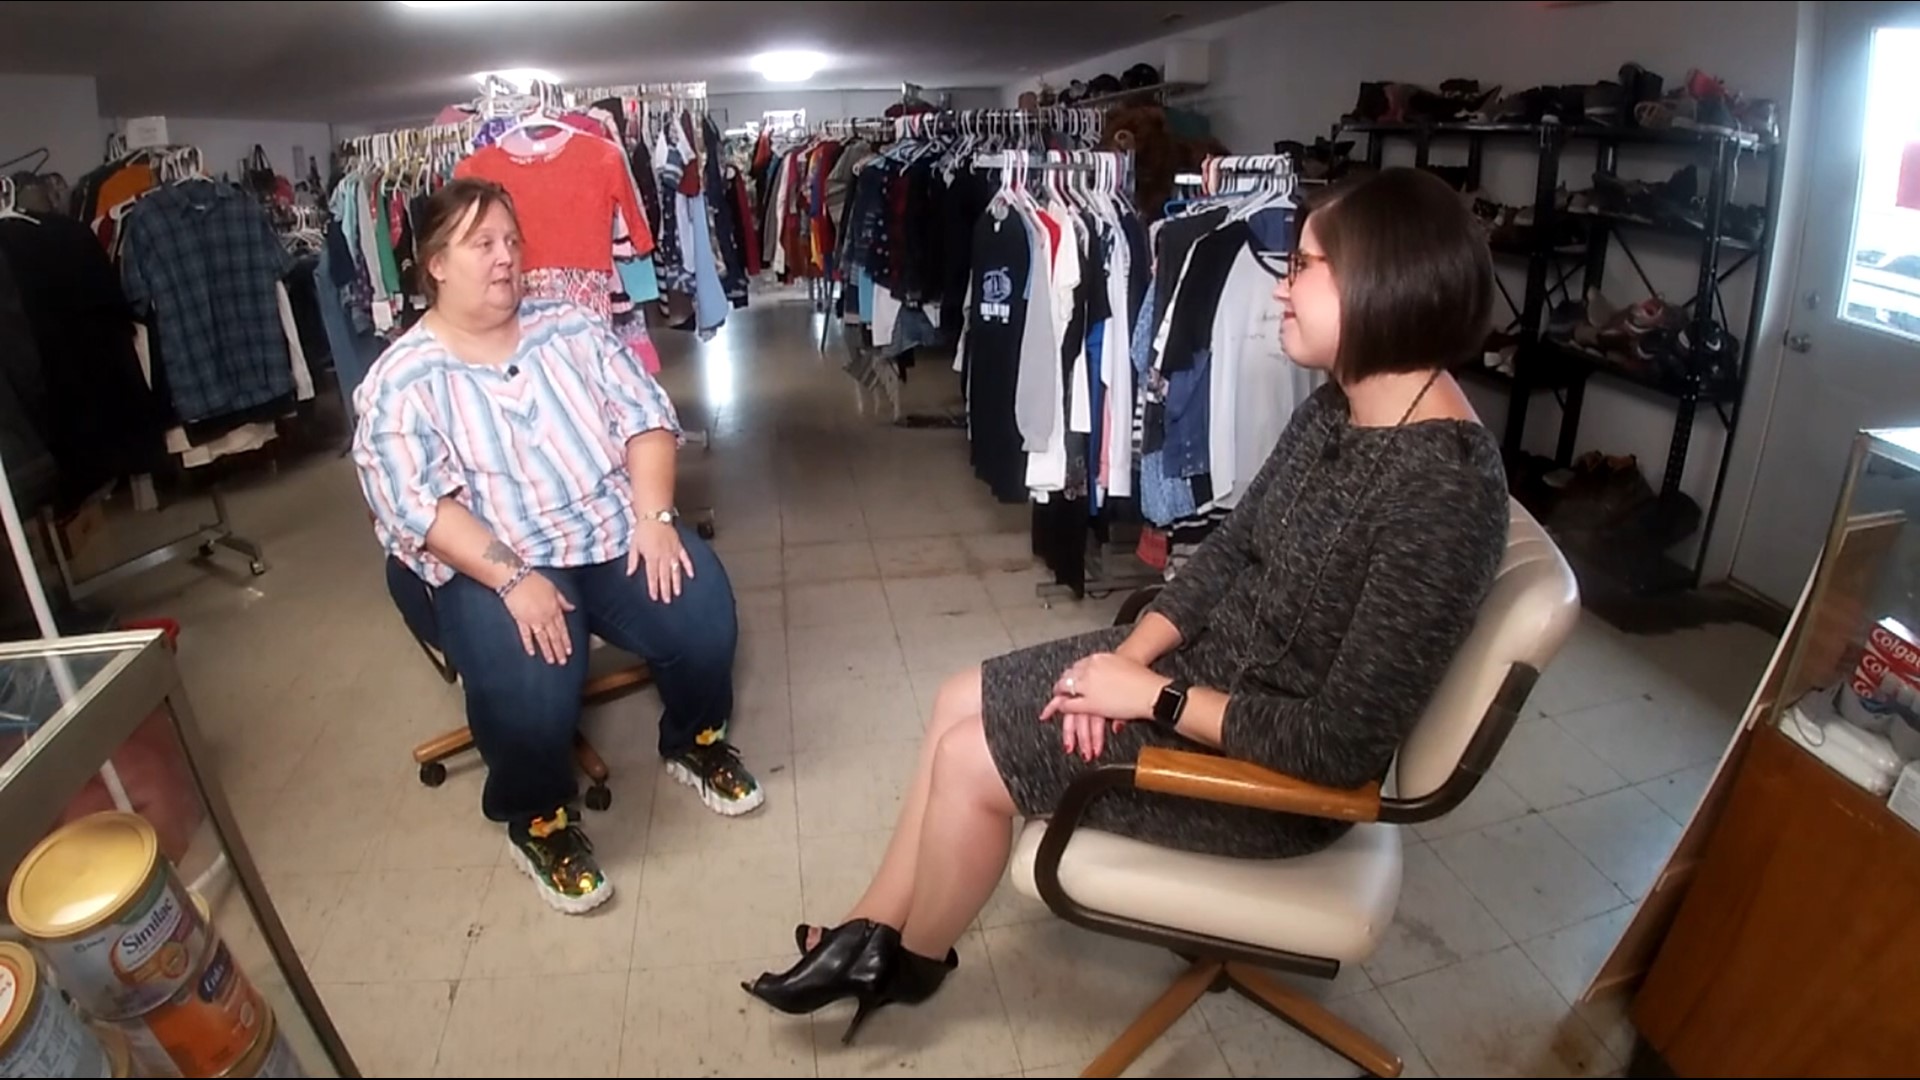 Sherry Bandy is "Multiplying Good" by connecting customers with clothes, household items, and more - all for free.